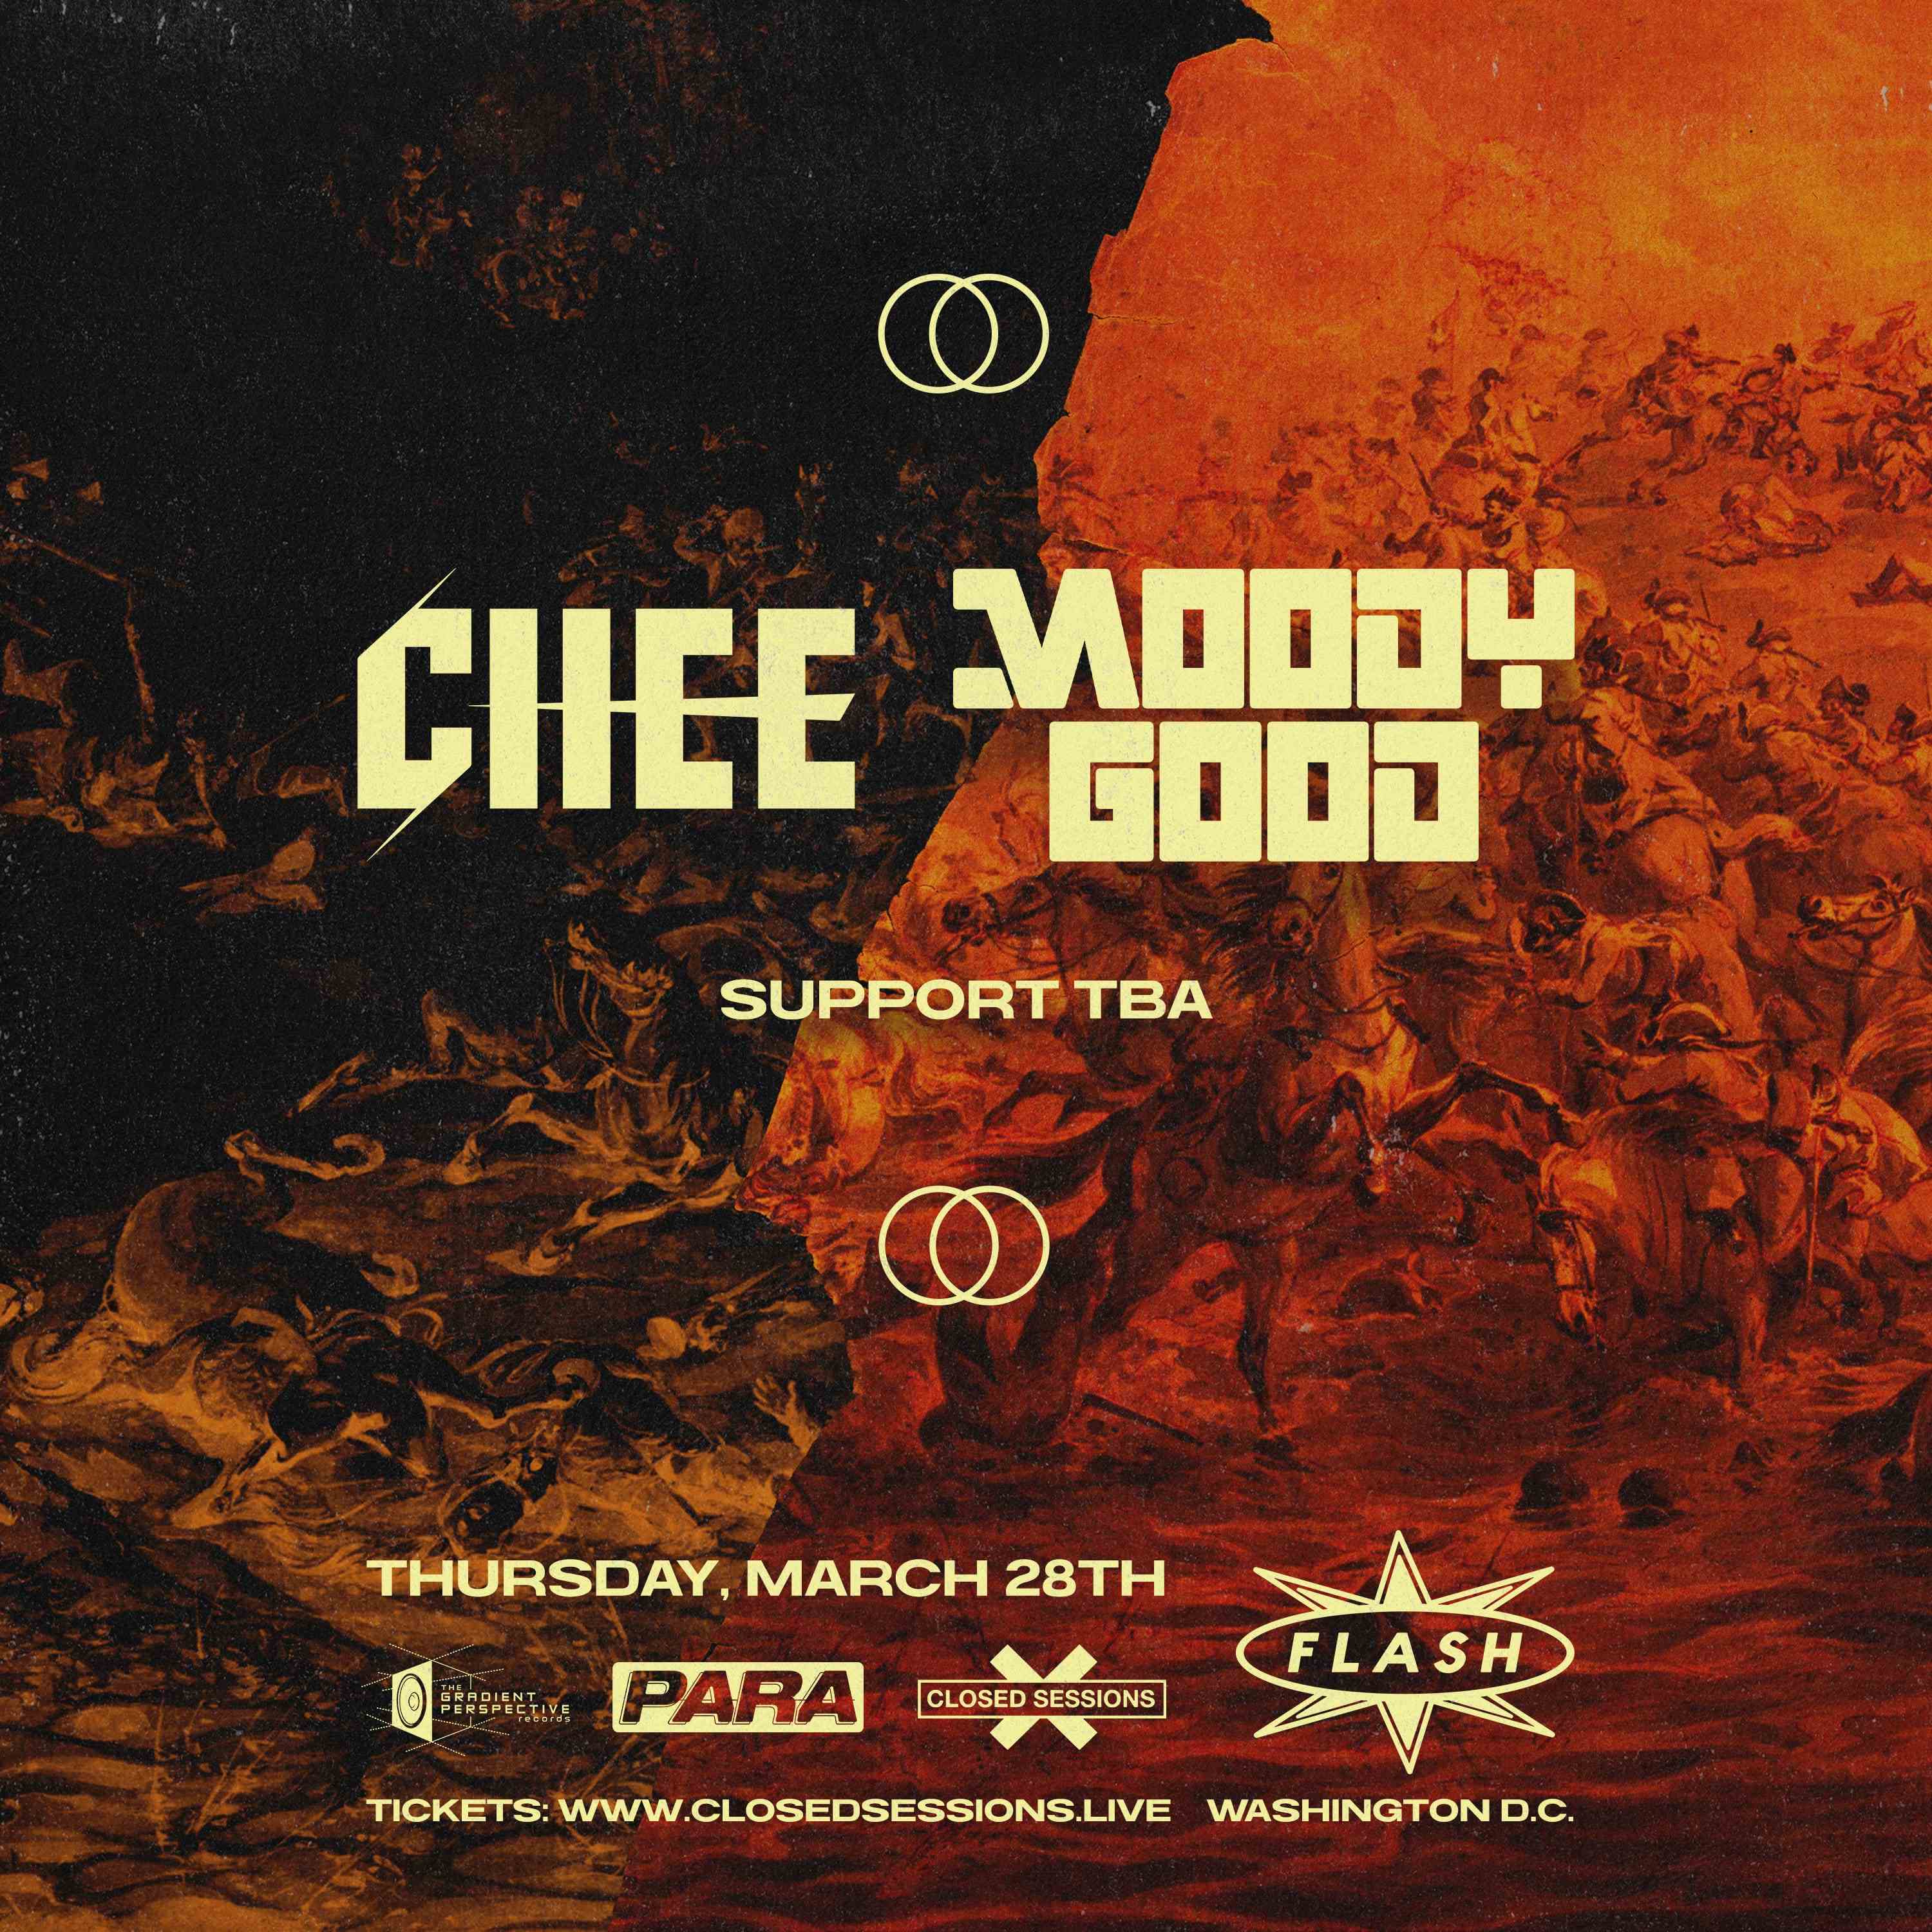 PARA PRESENTS, THE GRADIENT PERSPECTIVE & CLOSED SESSIONS PRESENTS: Chee - Moody Good event flyer